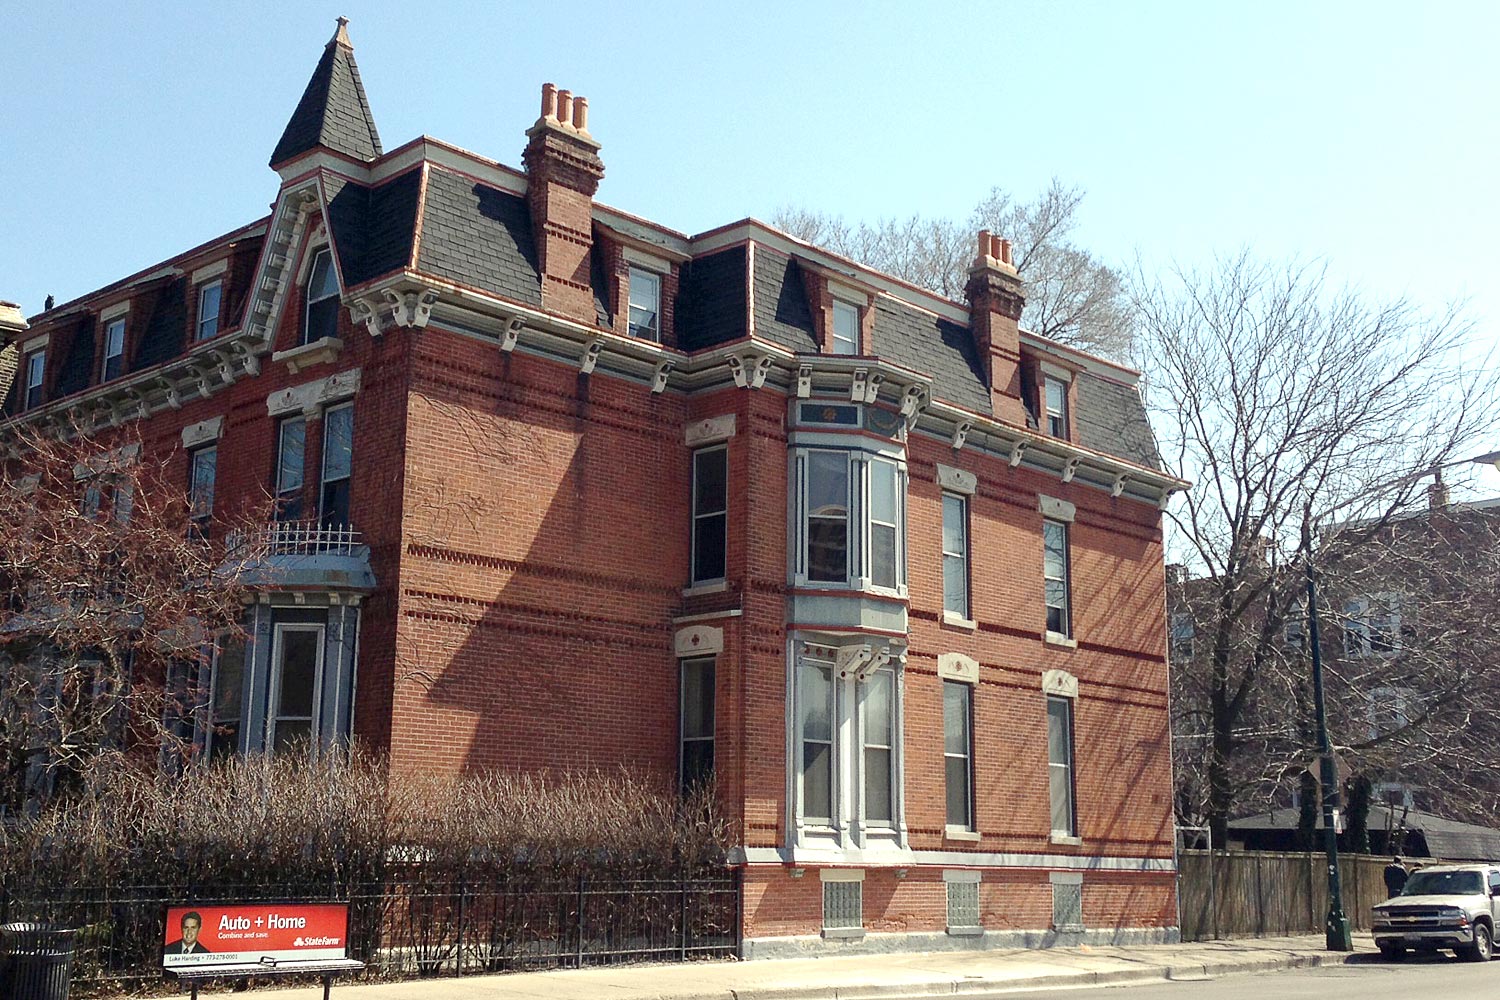 This Wicker Park Foreclosure Sold for $900,000—Green Carpet and All